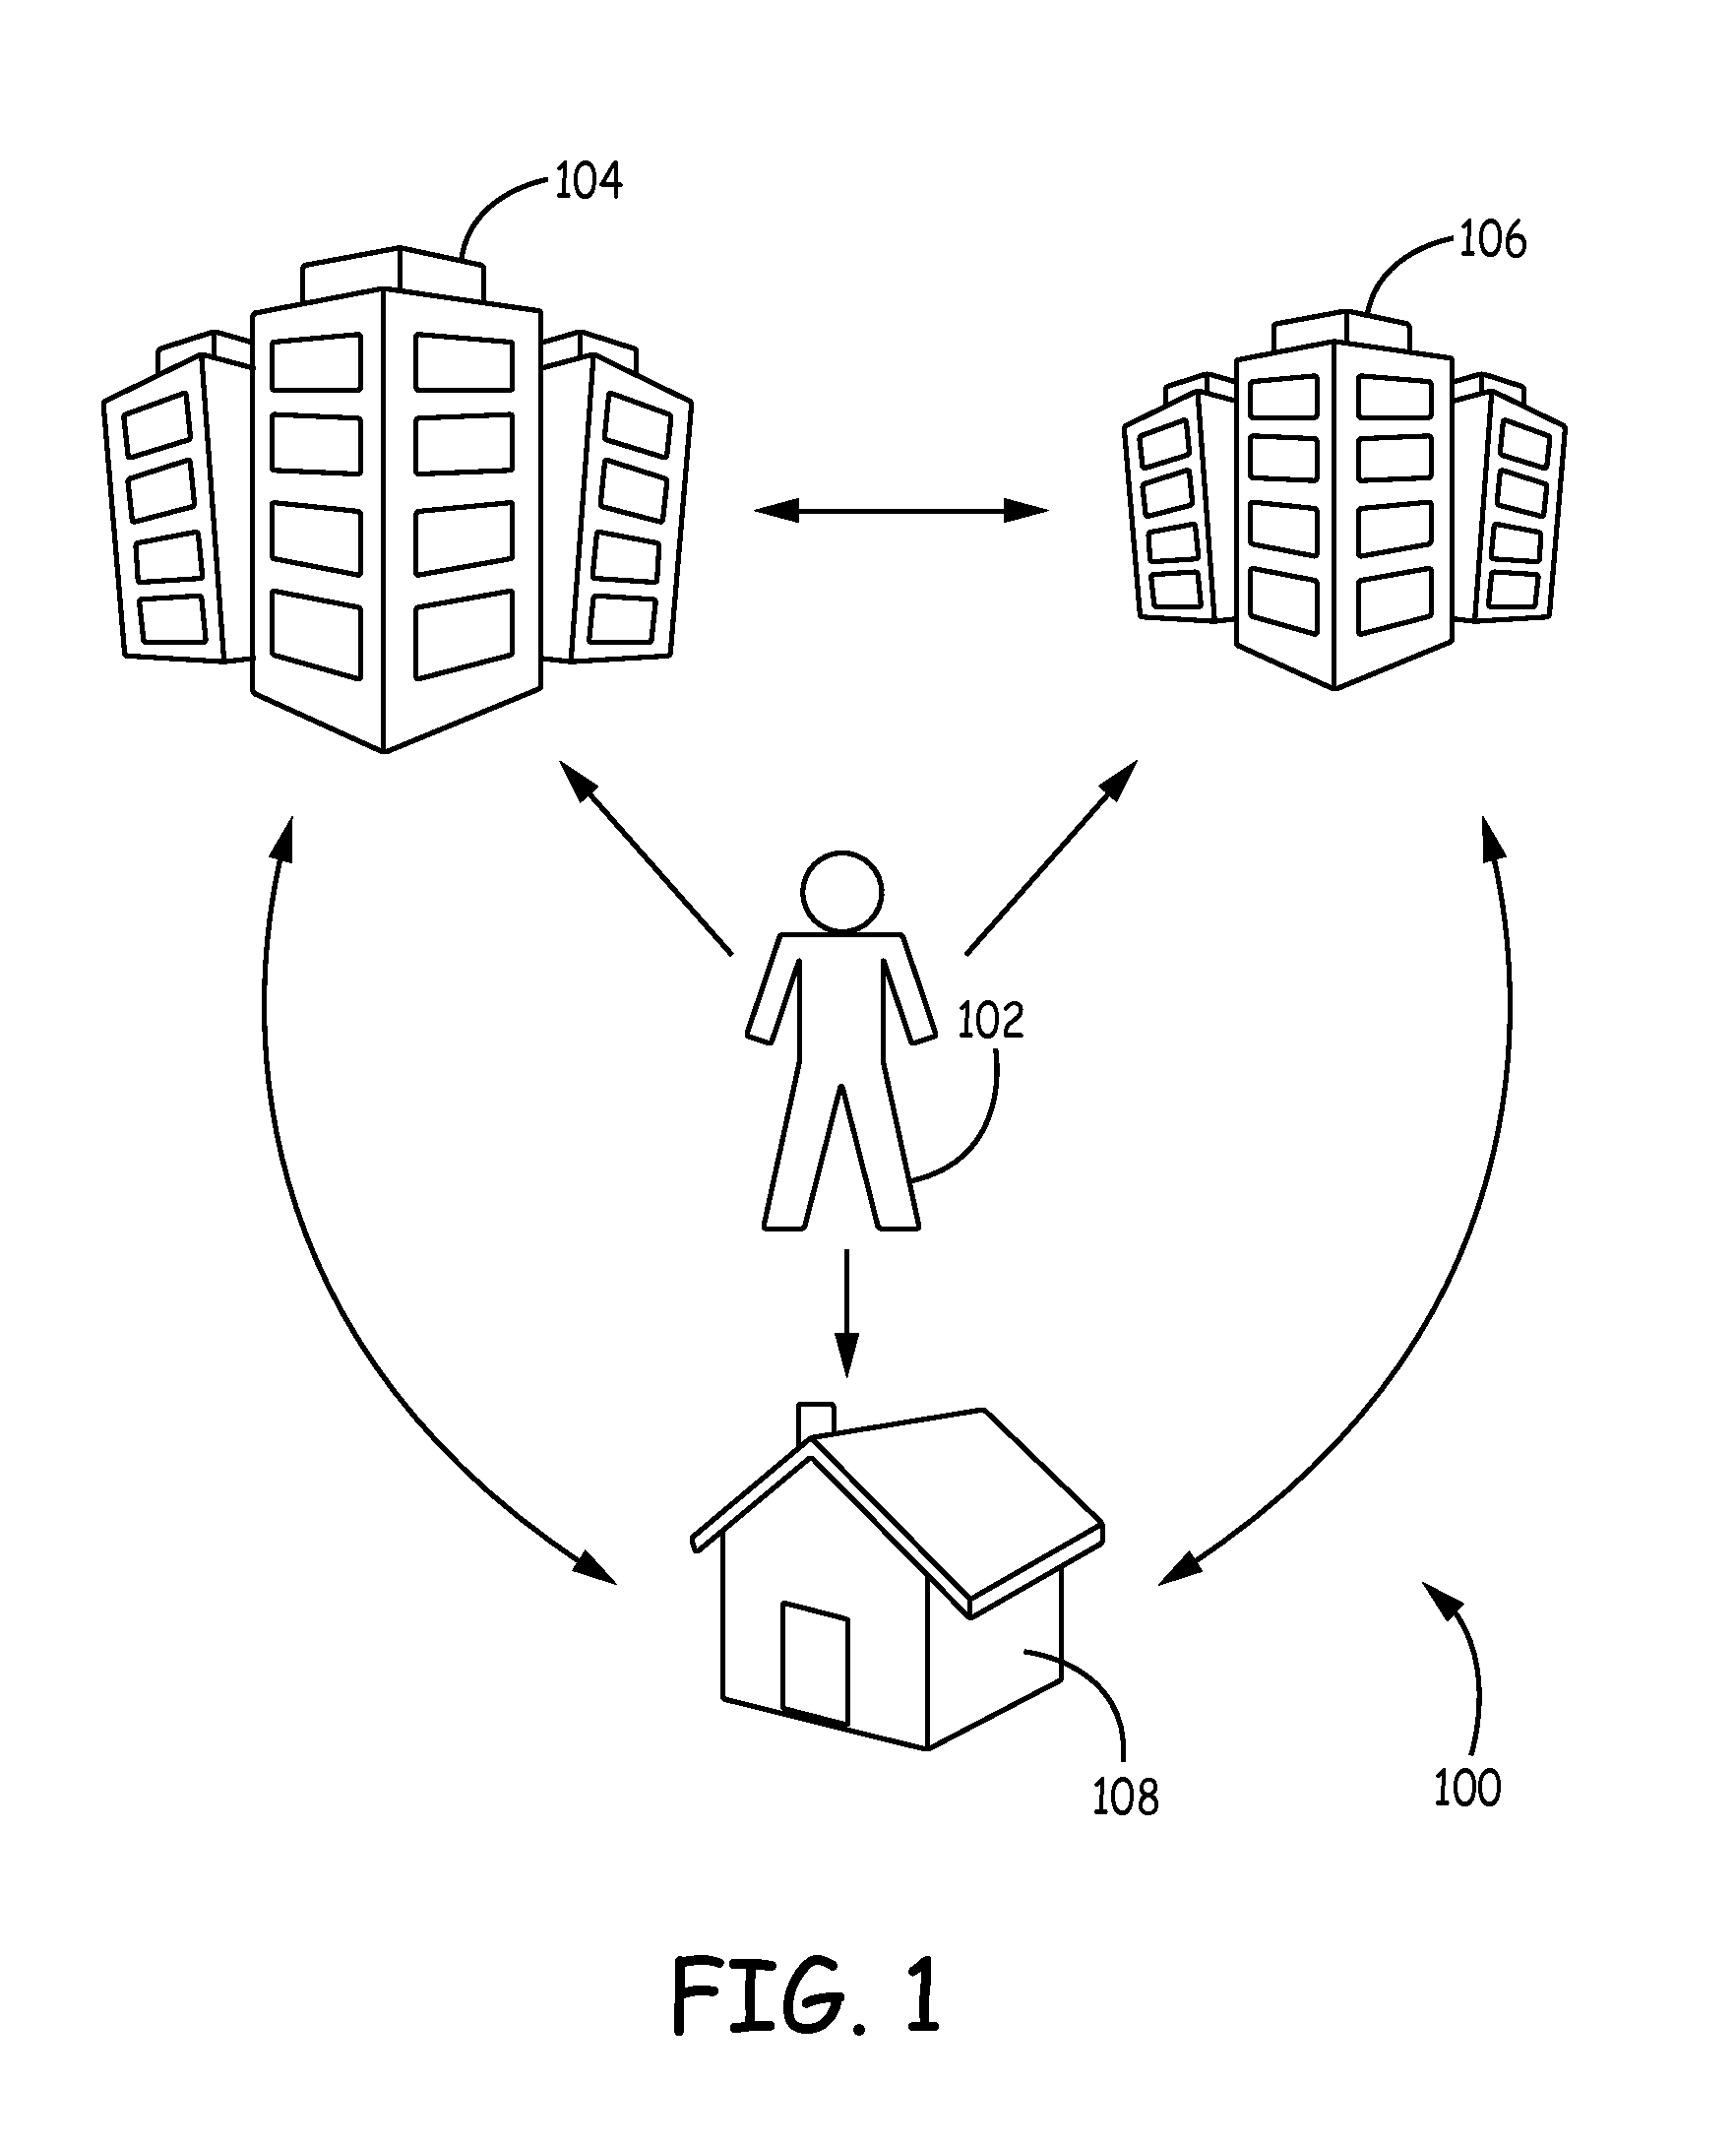 Comprehensive health assessment system and method